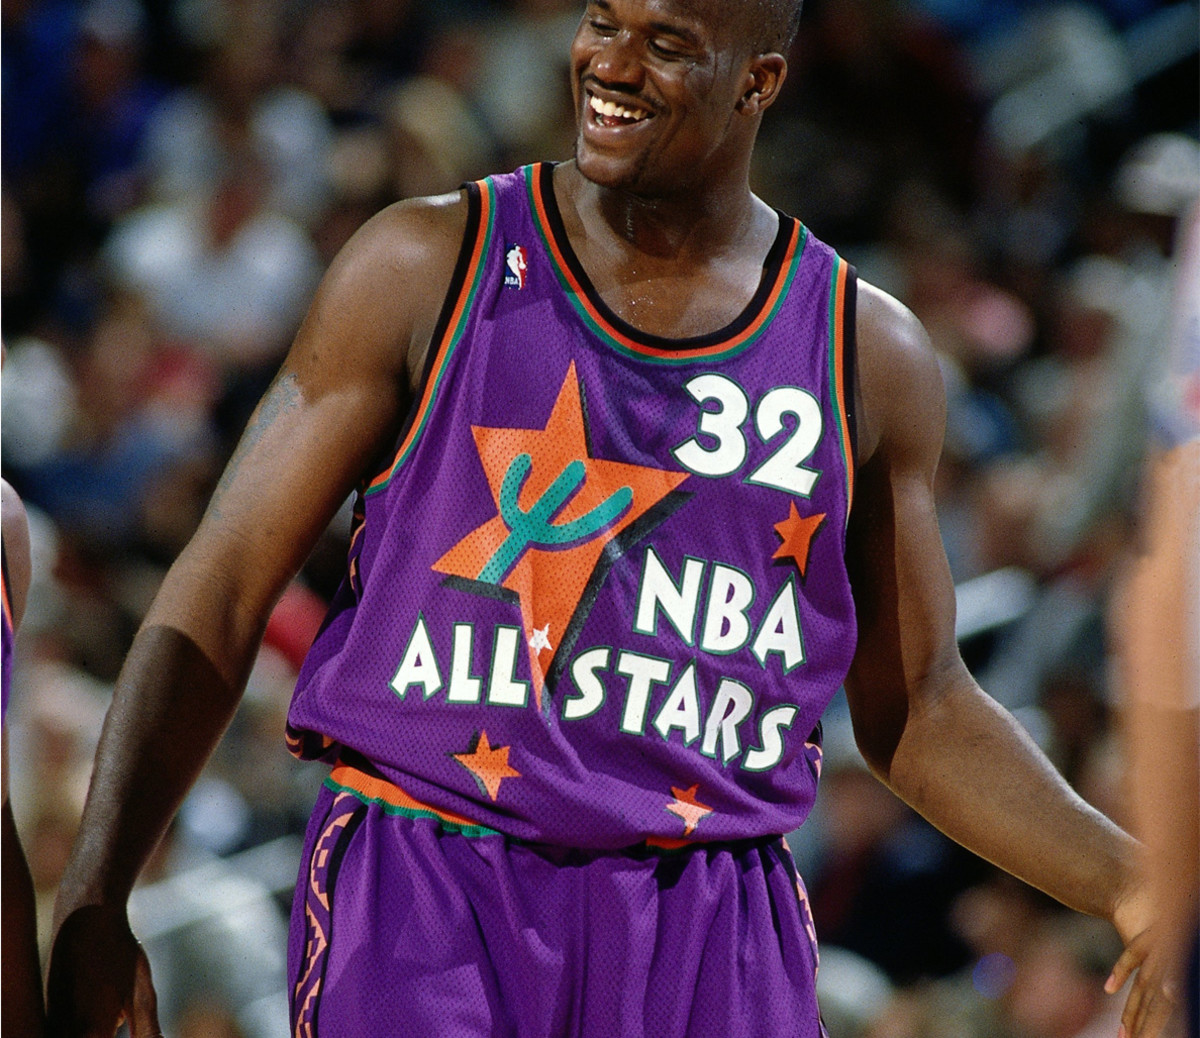 Worst NBA jerseys ever: Ranking the top 10 - Sports Illustrated